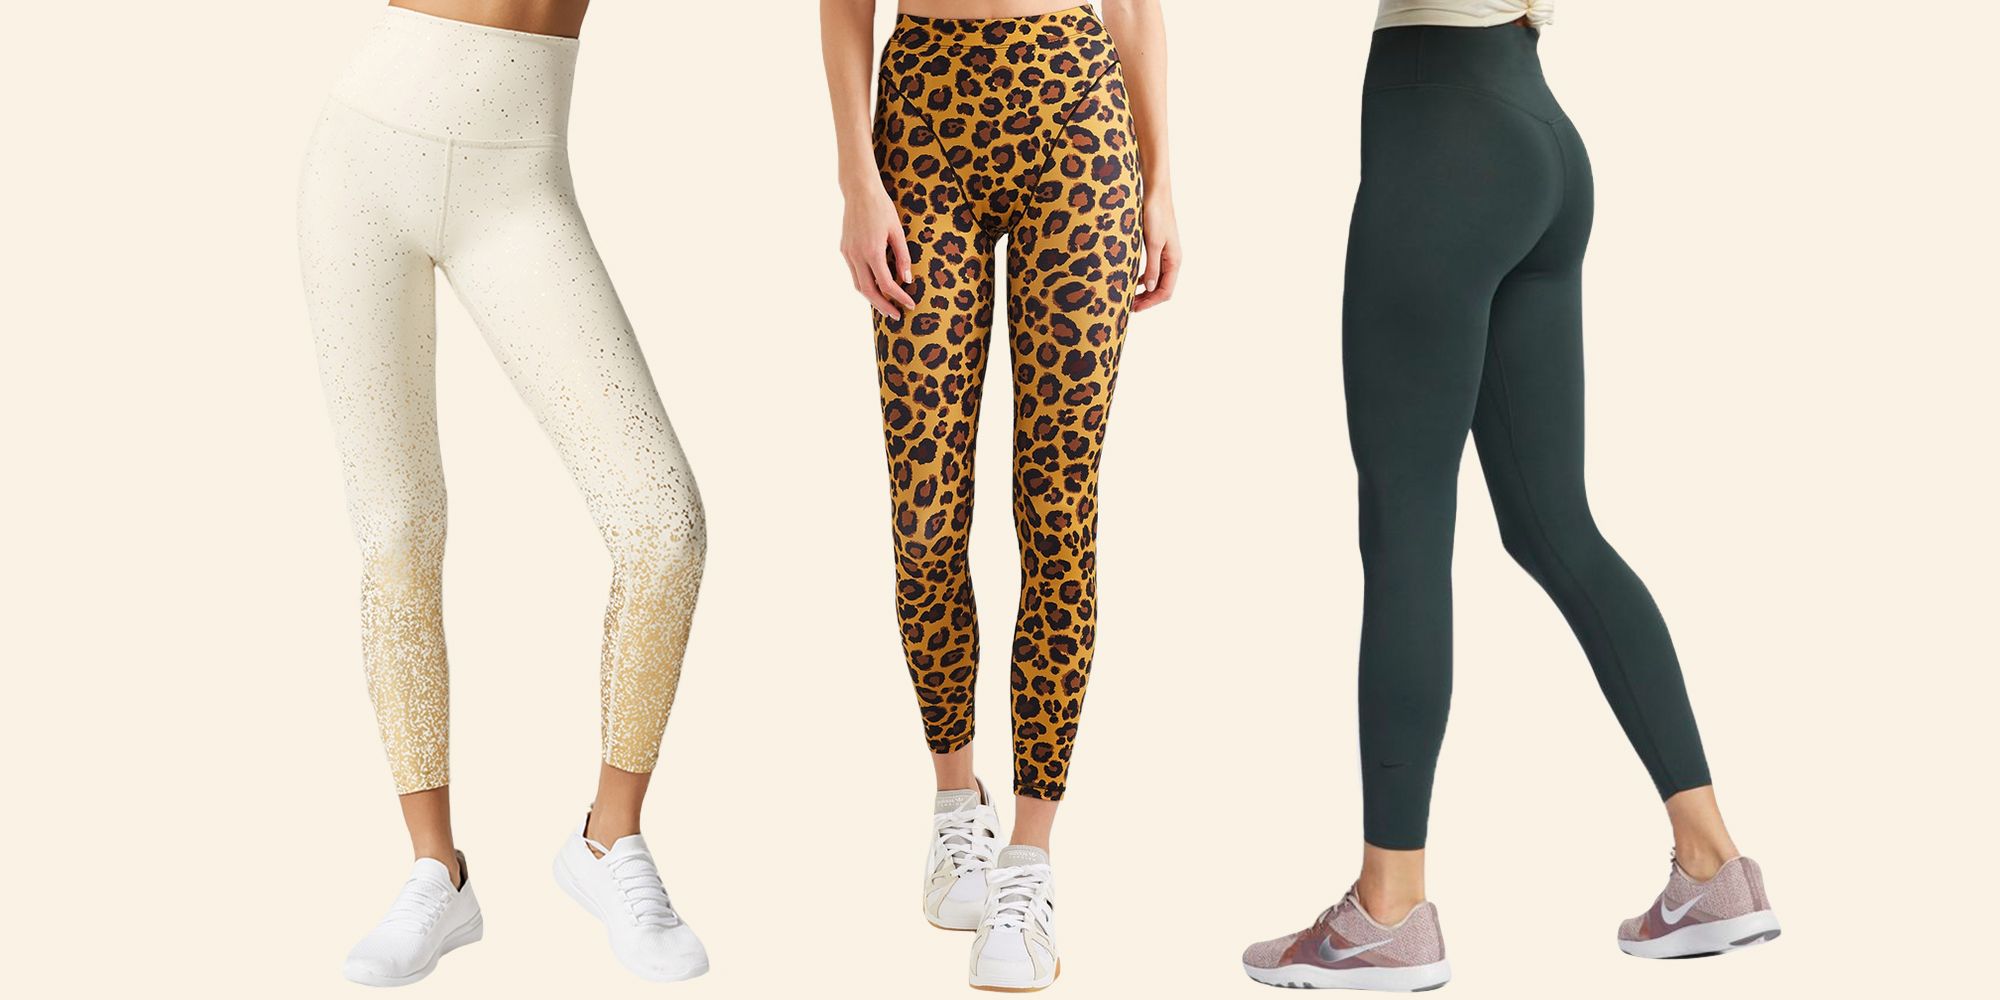 these leggings are everything 🤎 ALSO — use code: courtn86 for 15